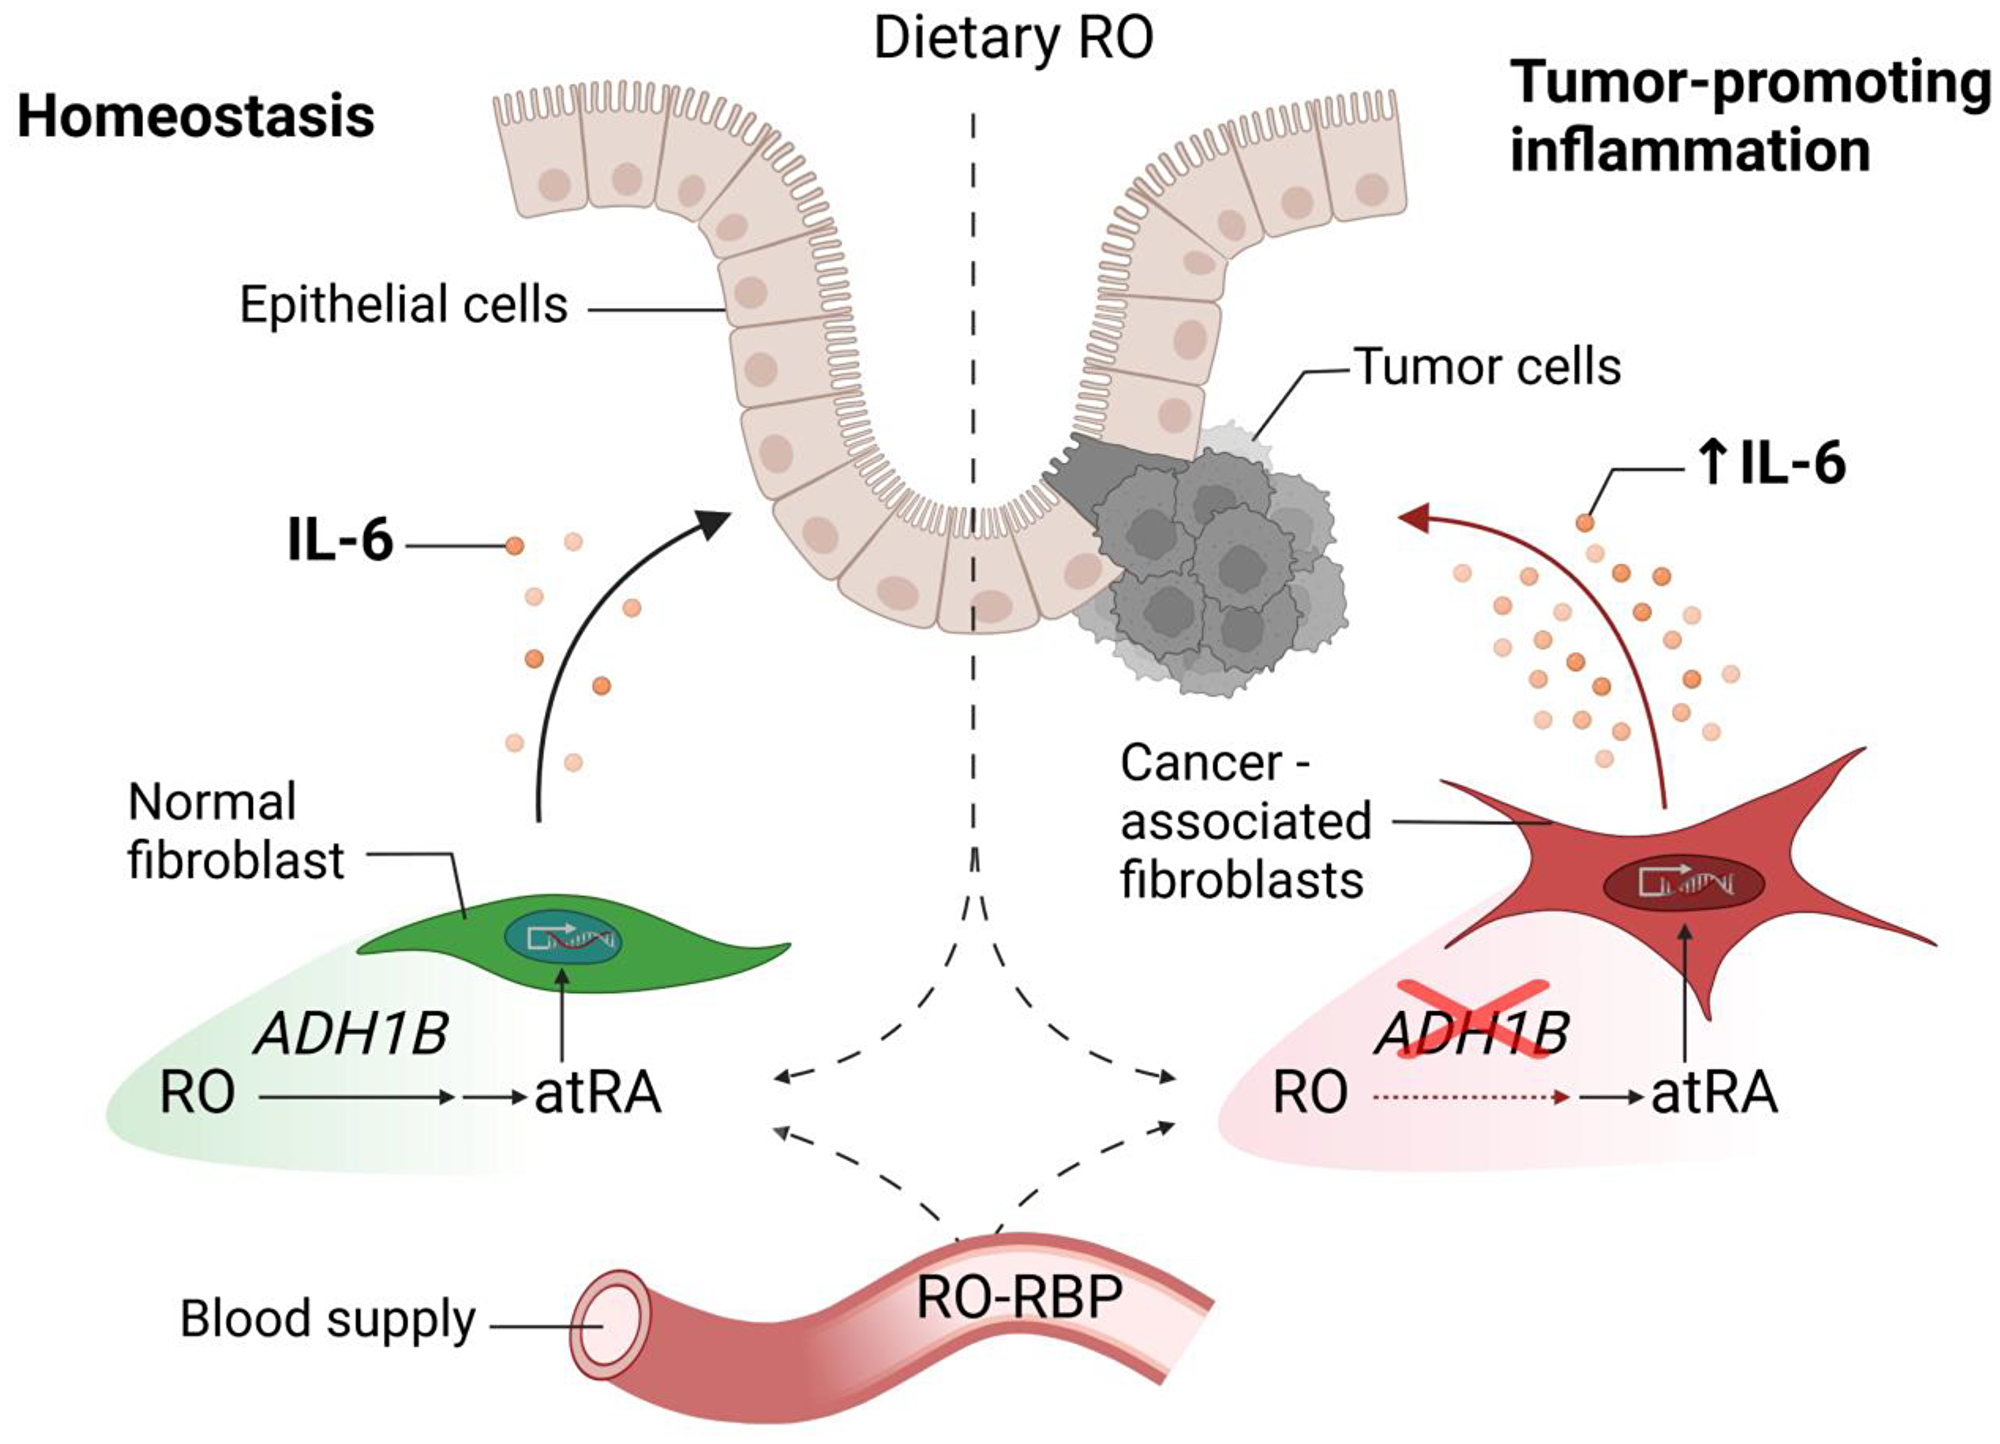 Retinol-mediated suppression of tumor-promoting IL-6 is disrupted in colon cancer-associated fibroblasts.